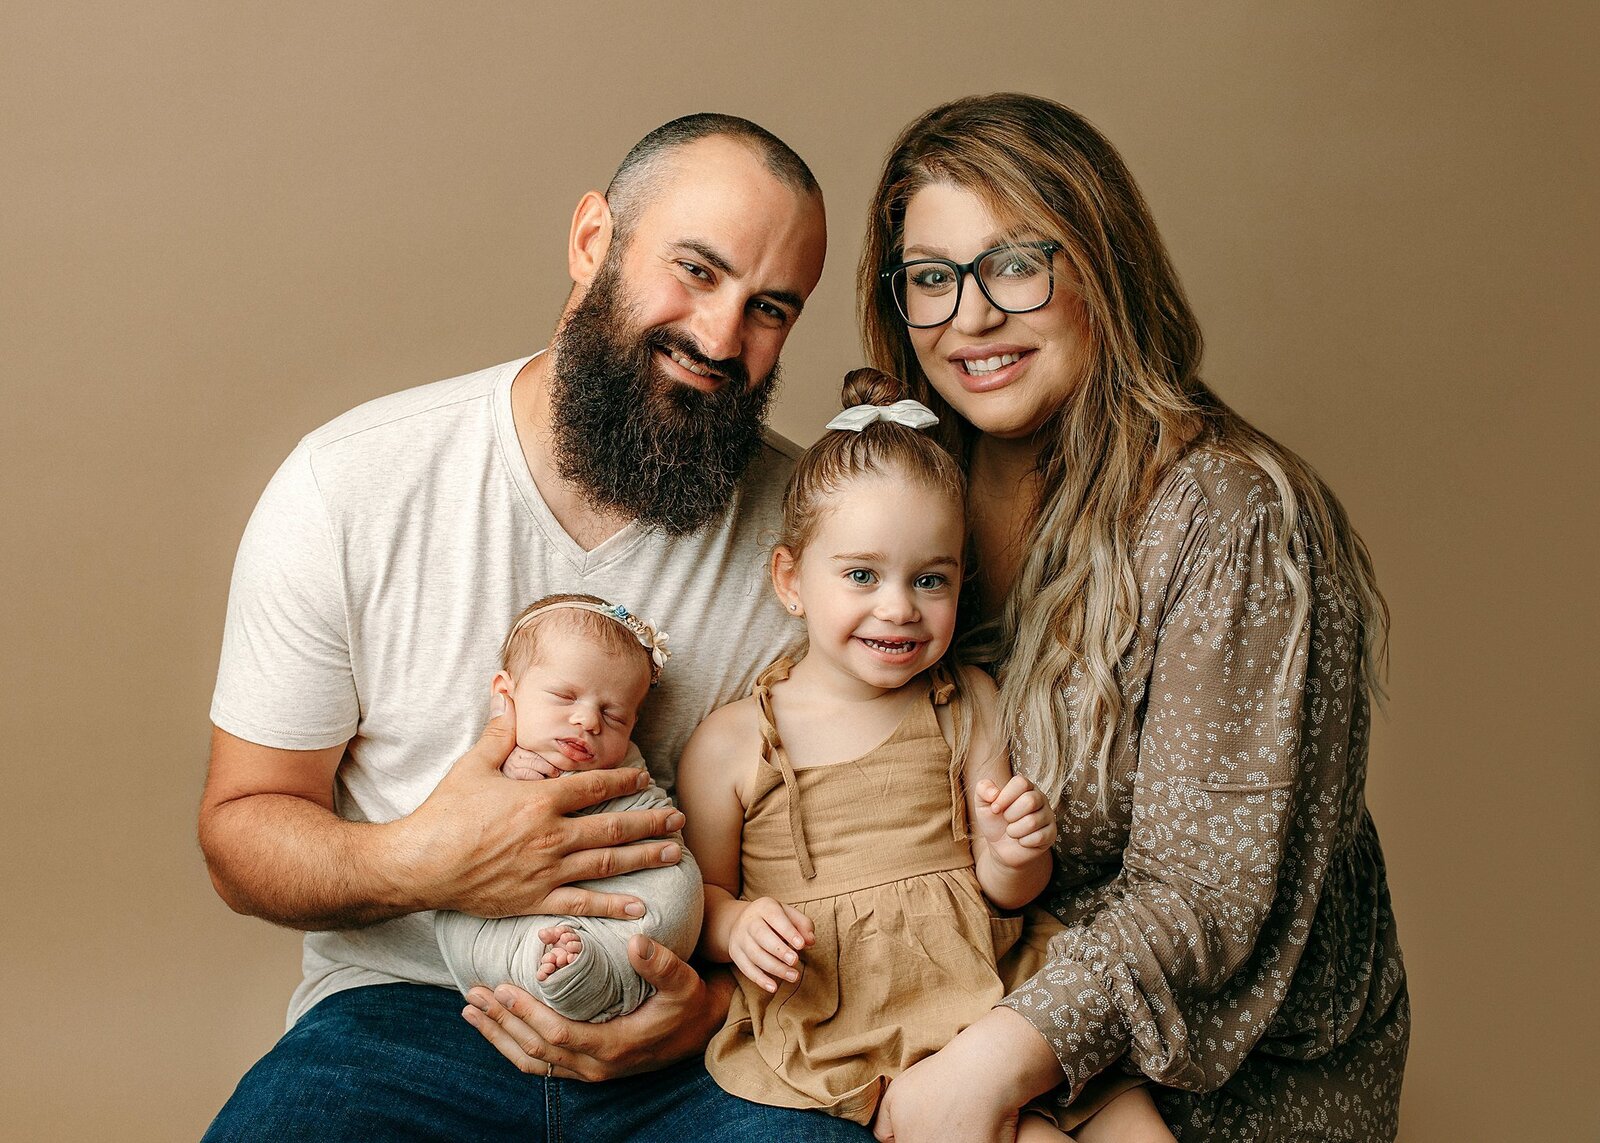 Family posed with newborn baby girl.